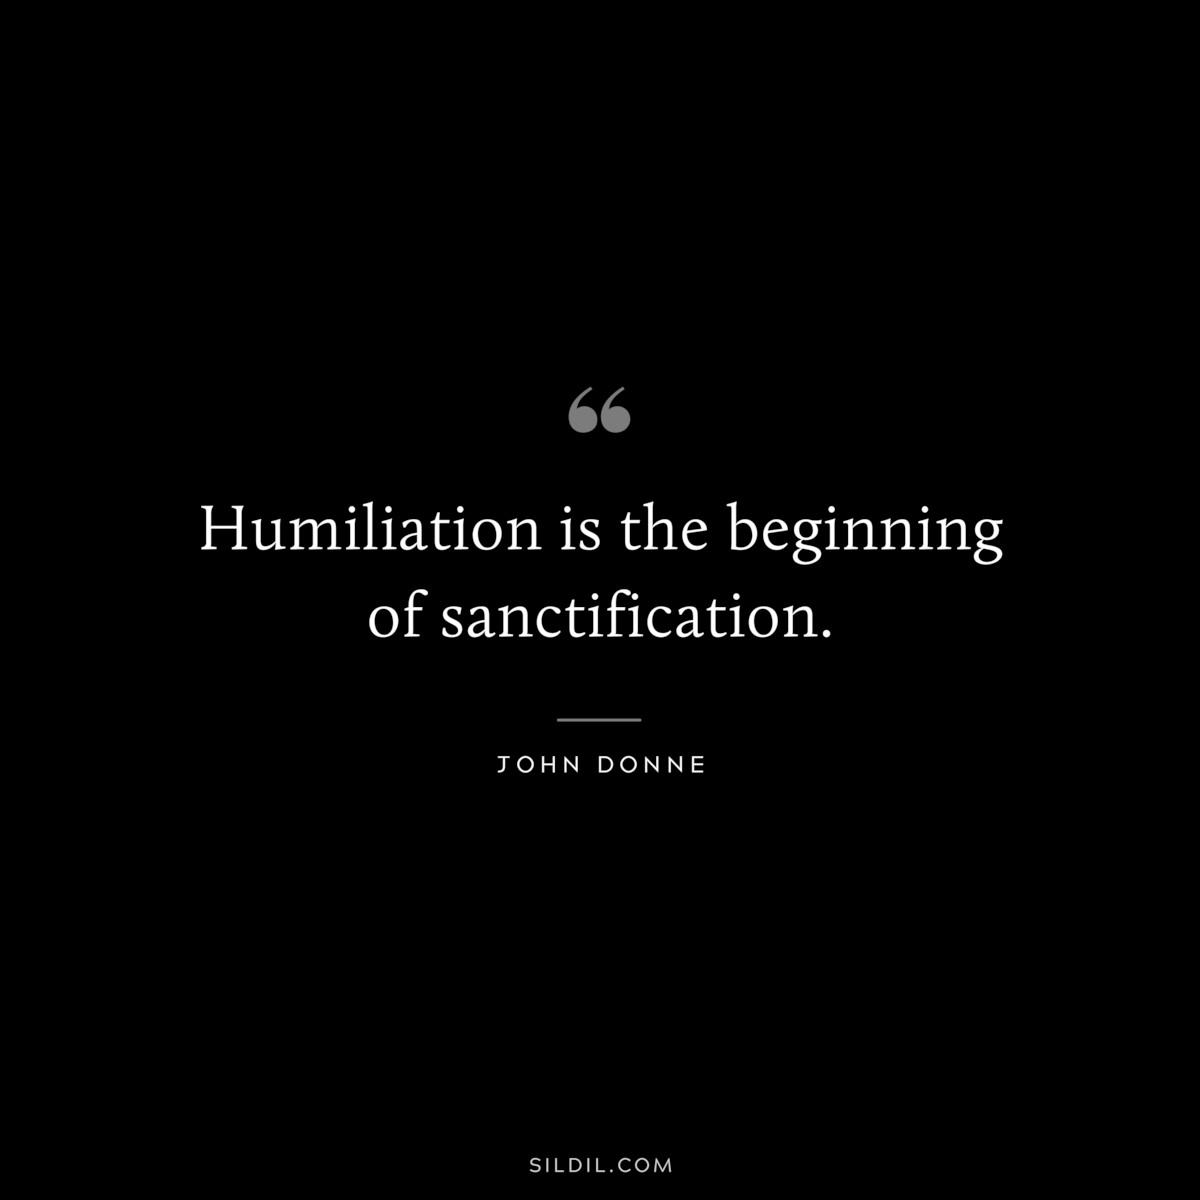 Humiliation is the beginning of sanctification. ― John Donne